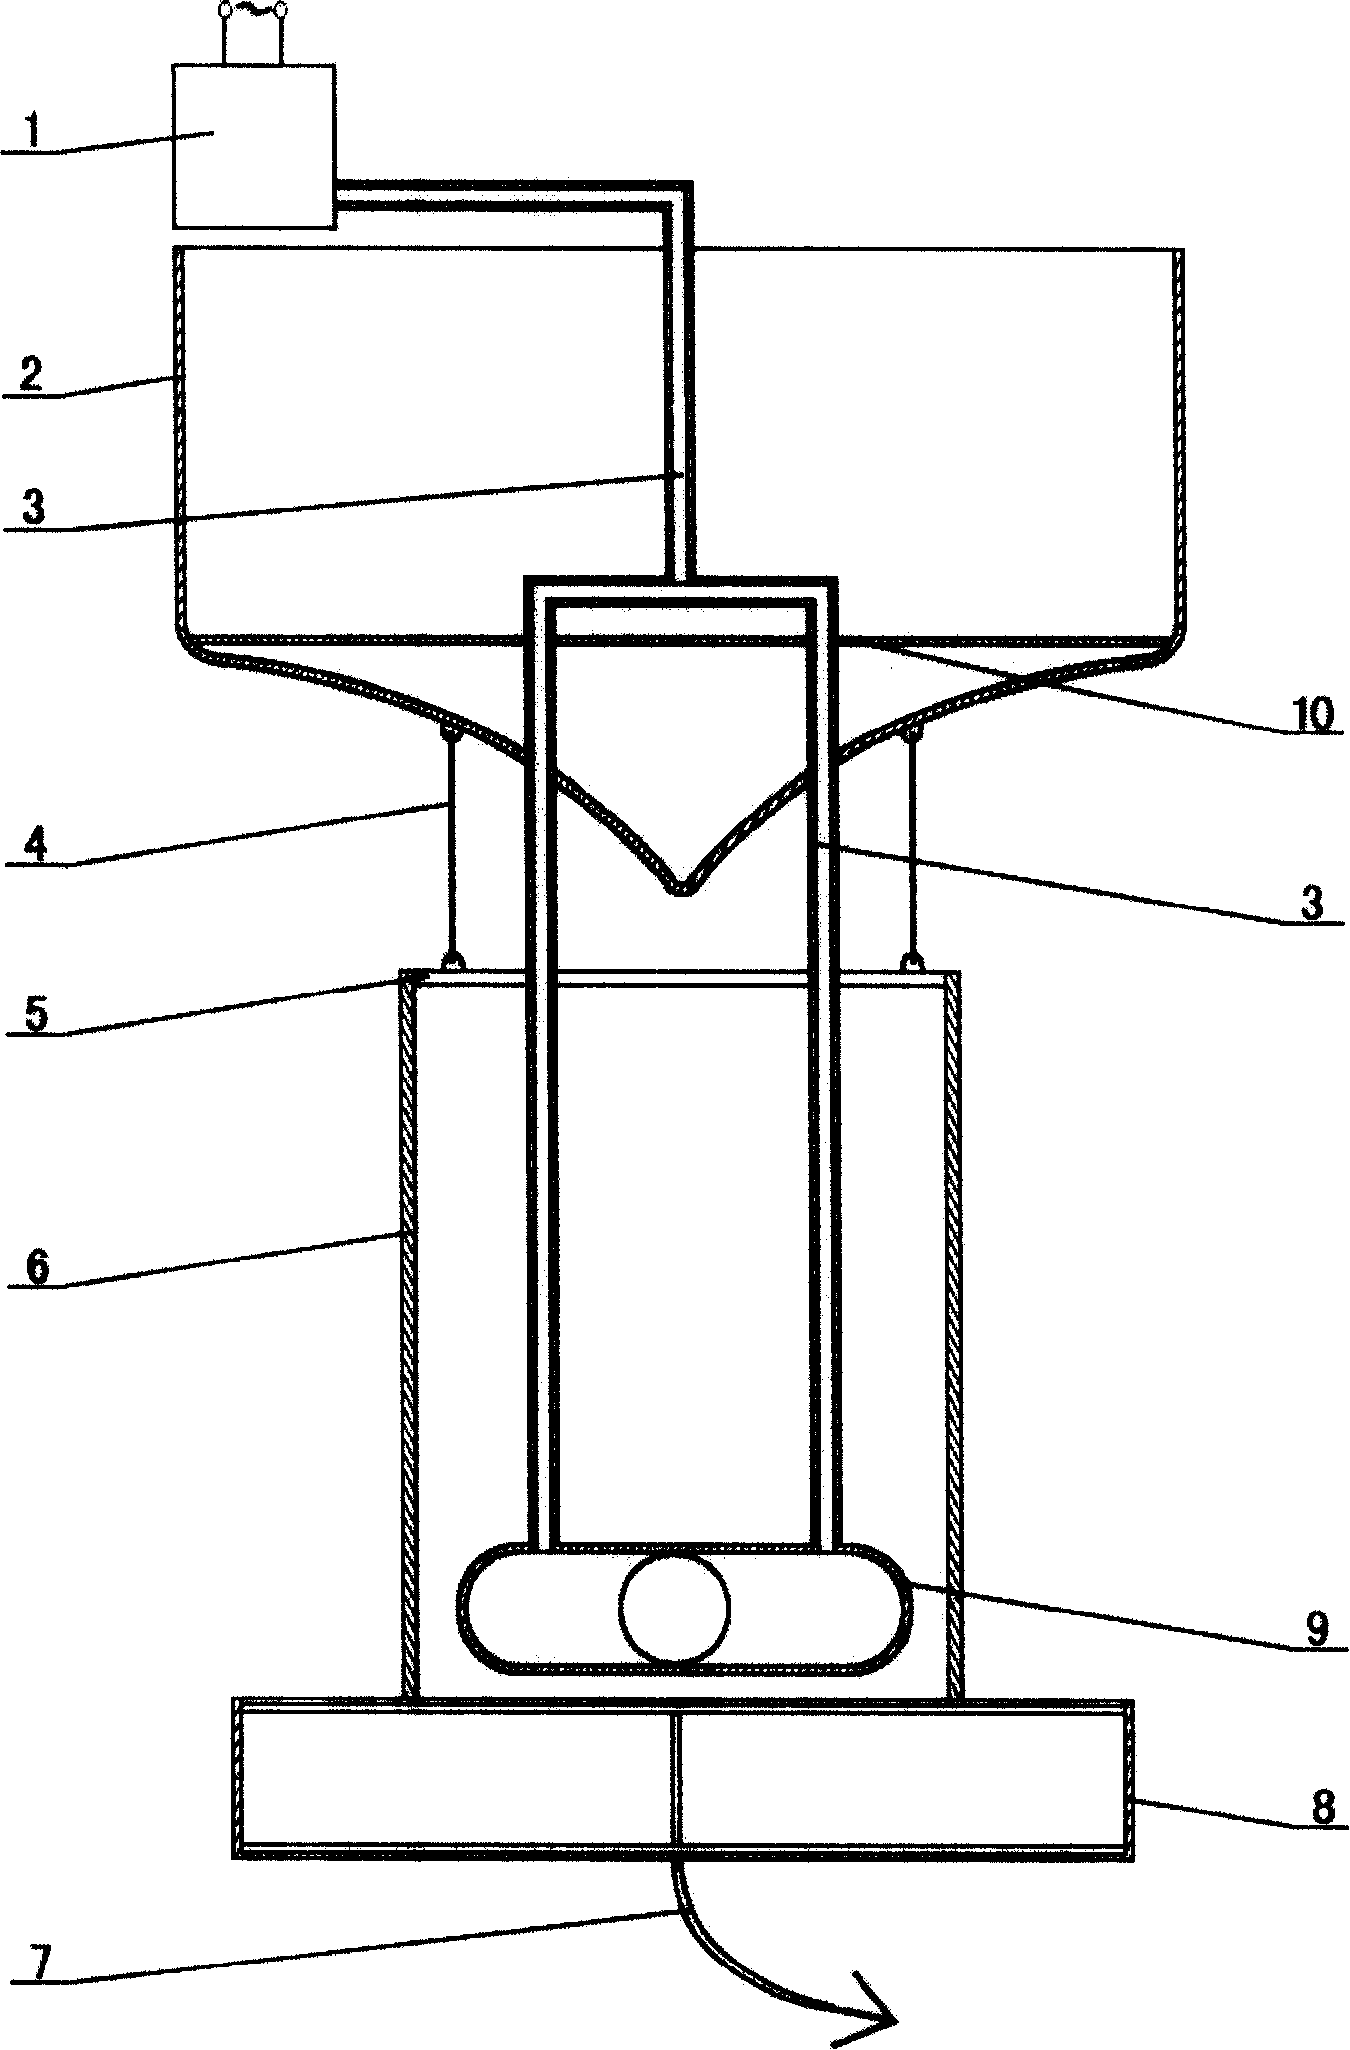 Aeration flow guiding water circulation treatment device